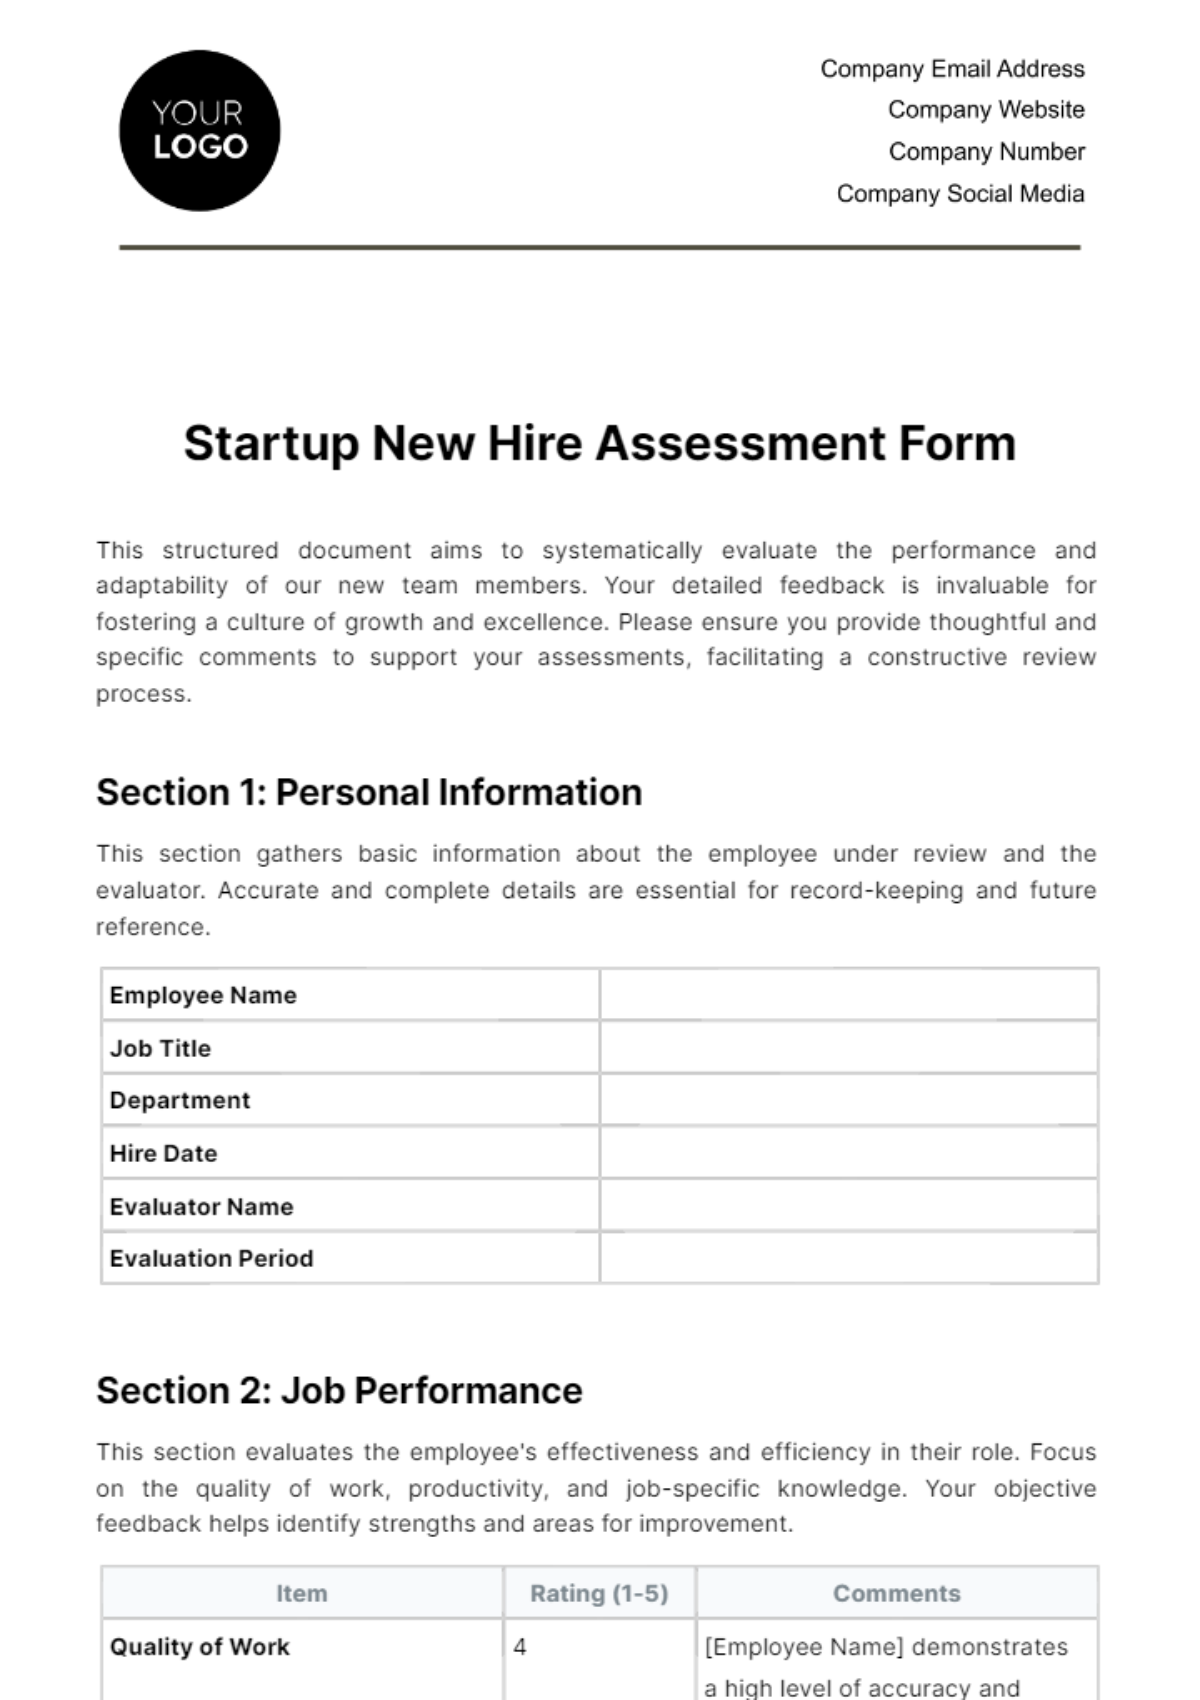 Startup New Hire Assessment Form Template